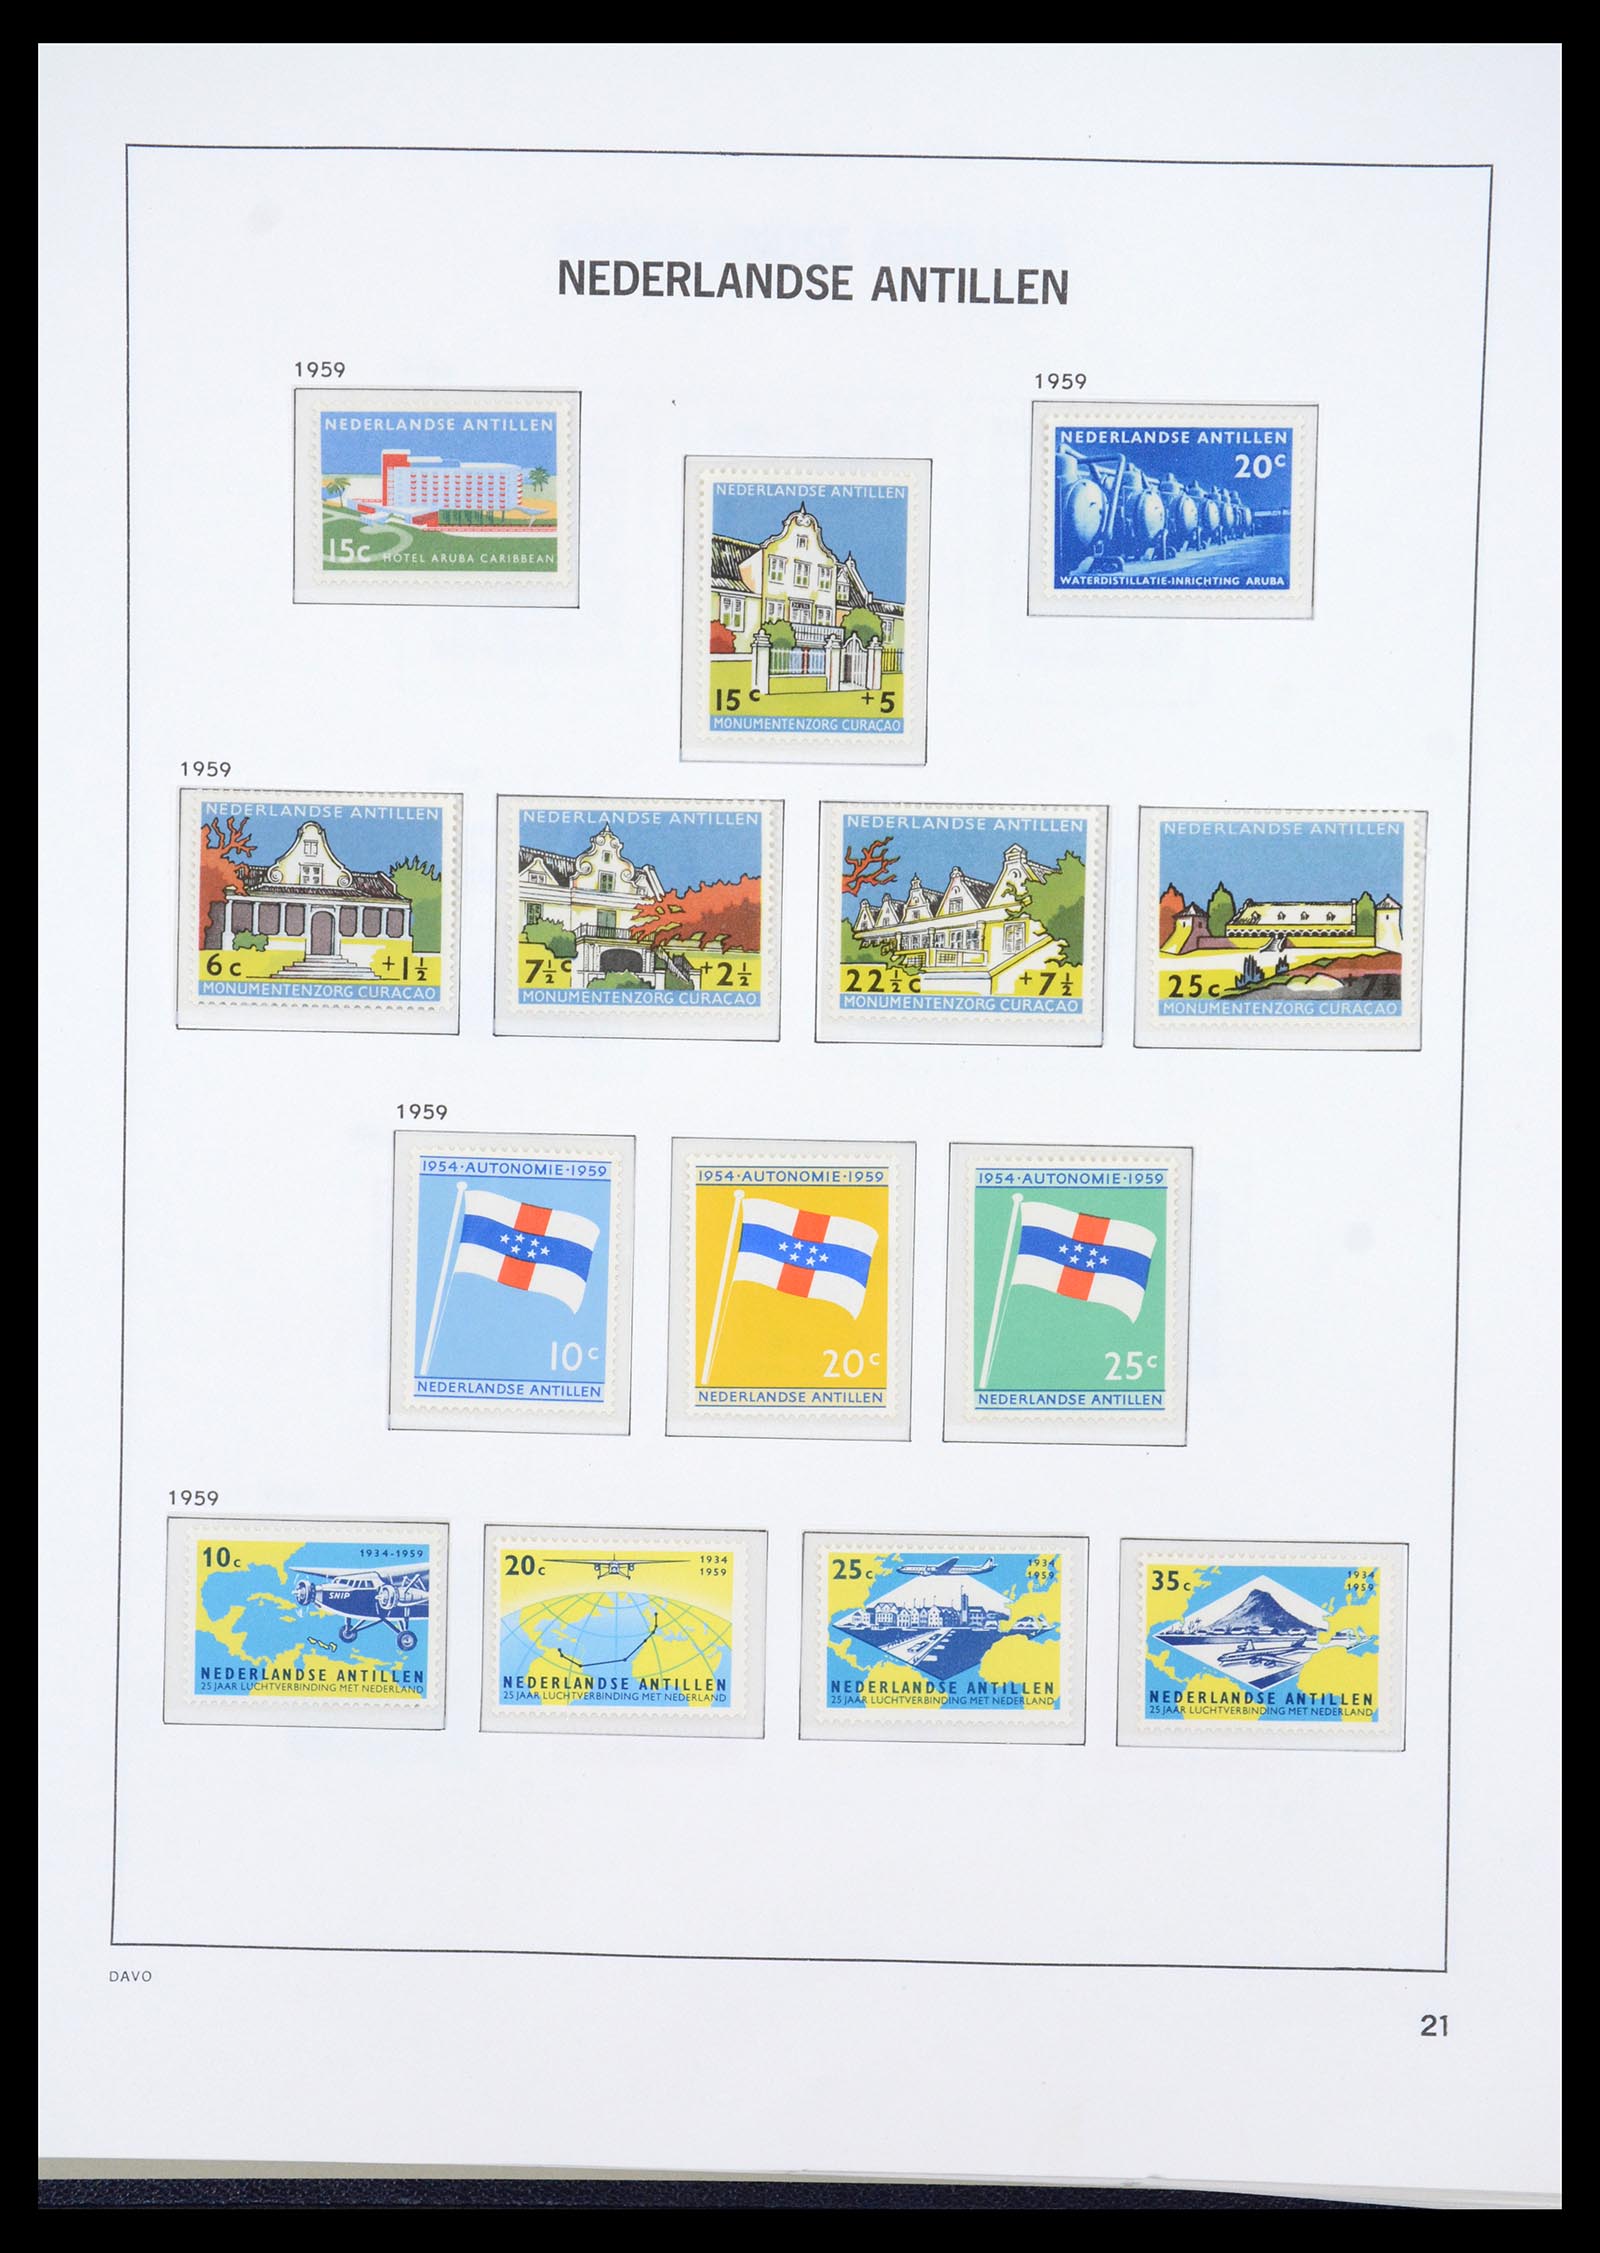 36446 021 - Stamp collection 36446 Curaçao and Netherlands Antilles 1873-1992.